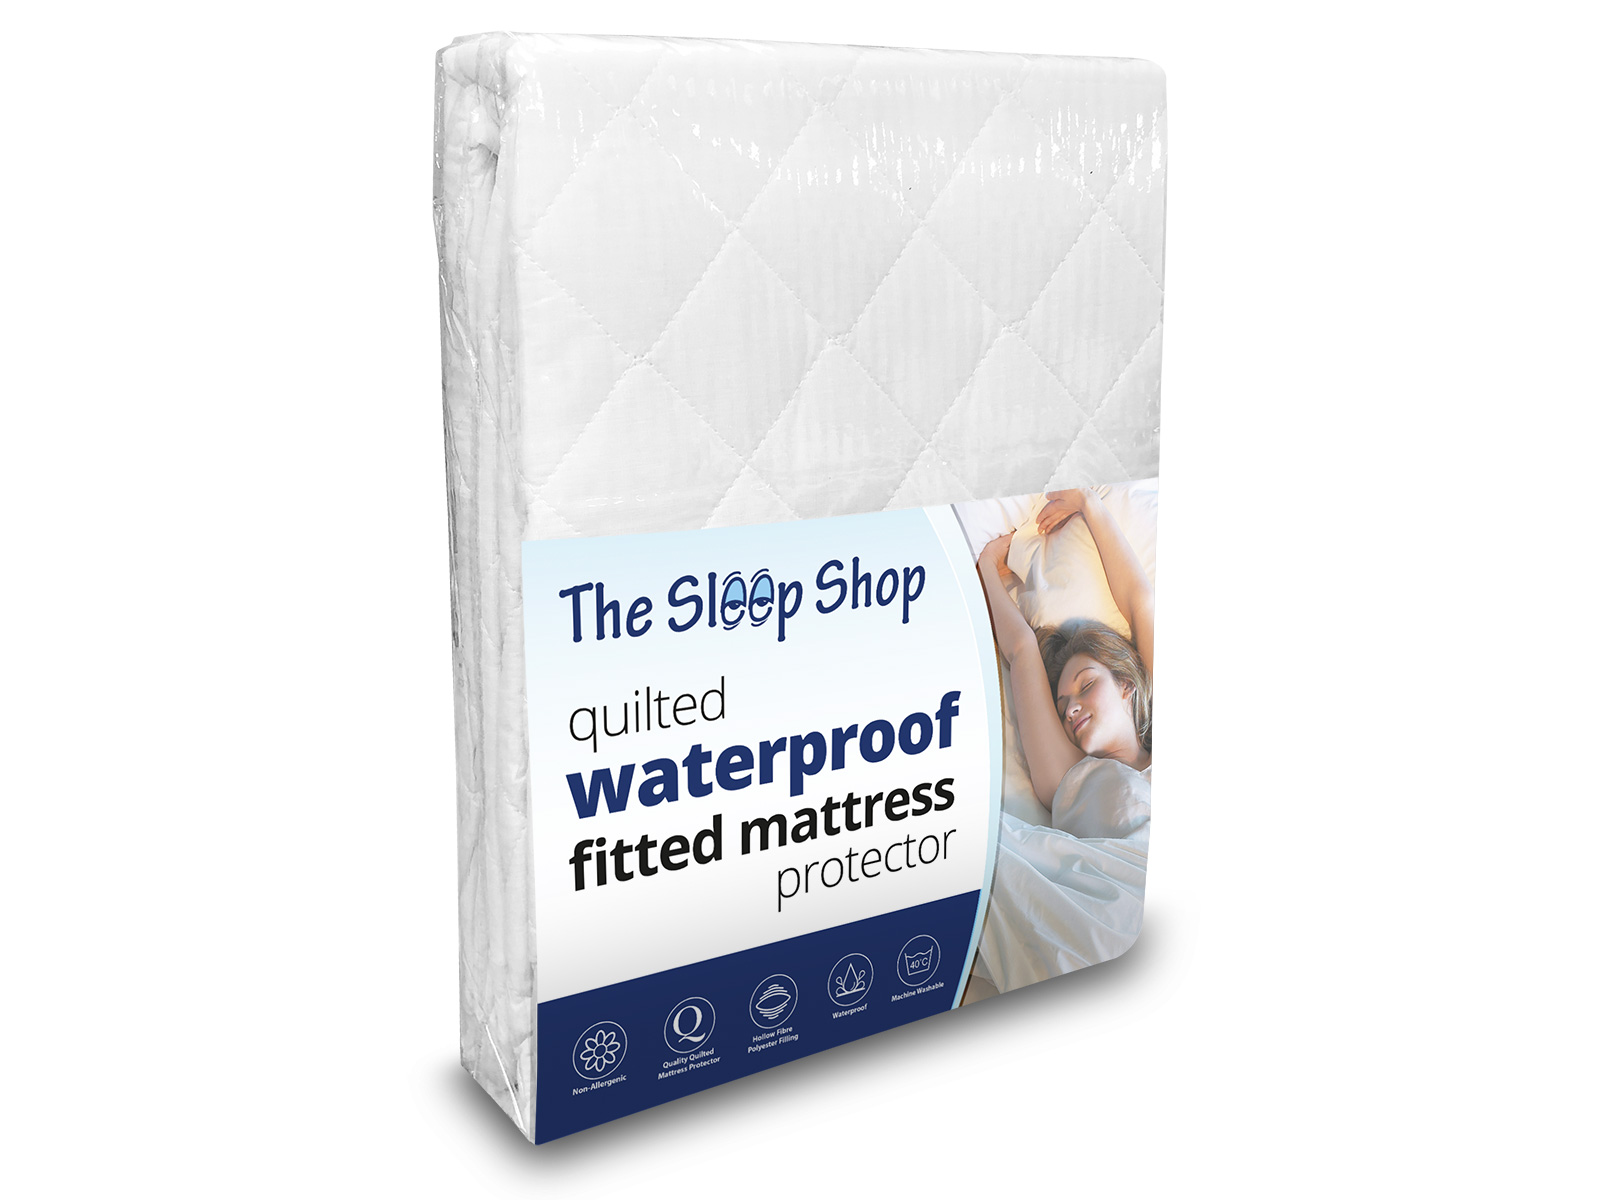 2ft6 Small Singe The Sleep Shop Quilted Waterproof Mattress Protector